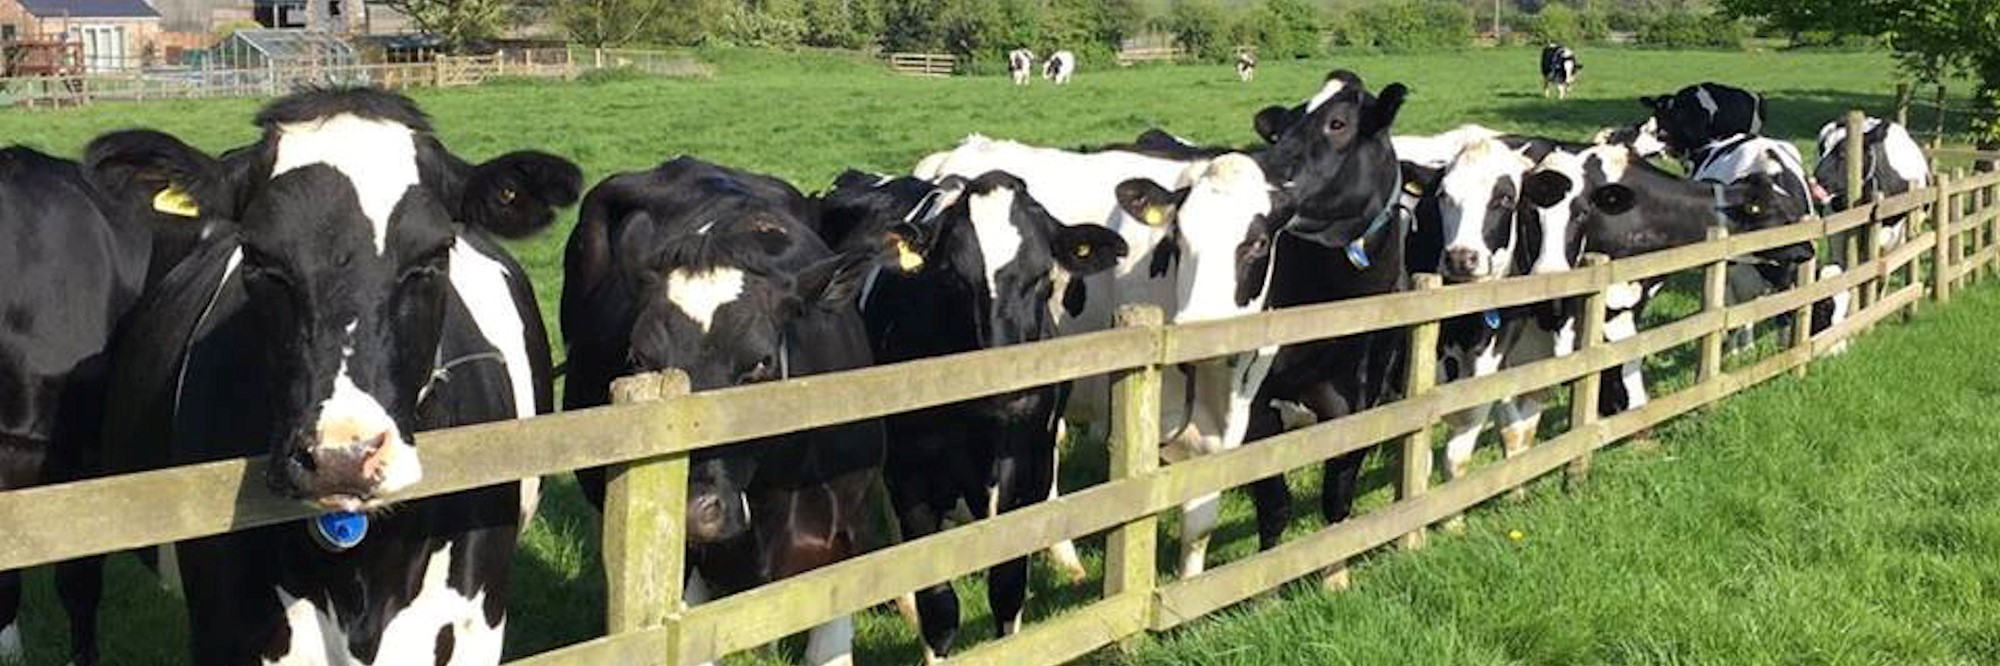 Herd of dairy cows stood by a fence